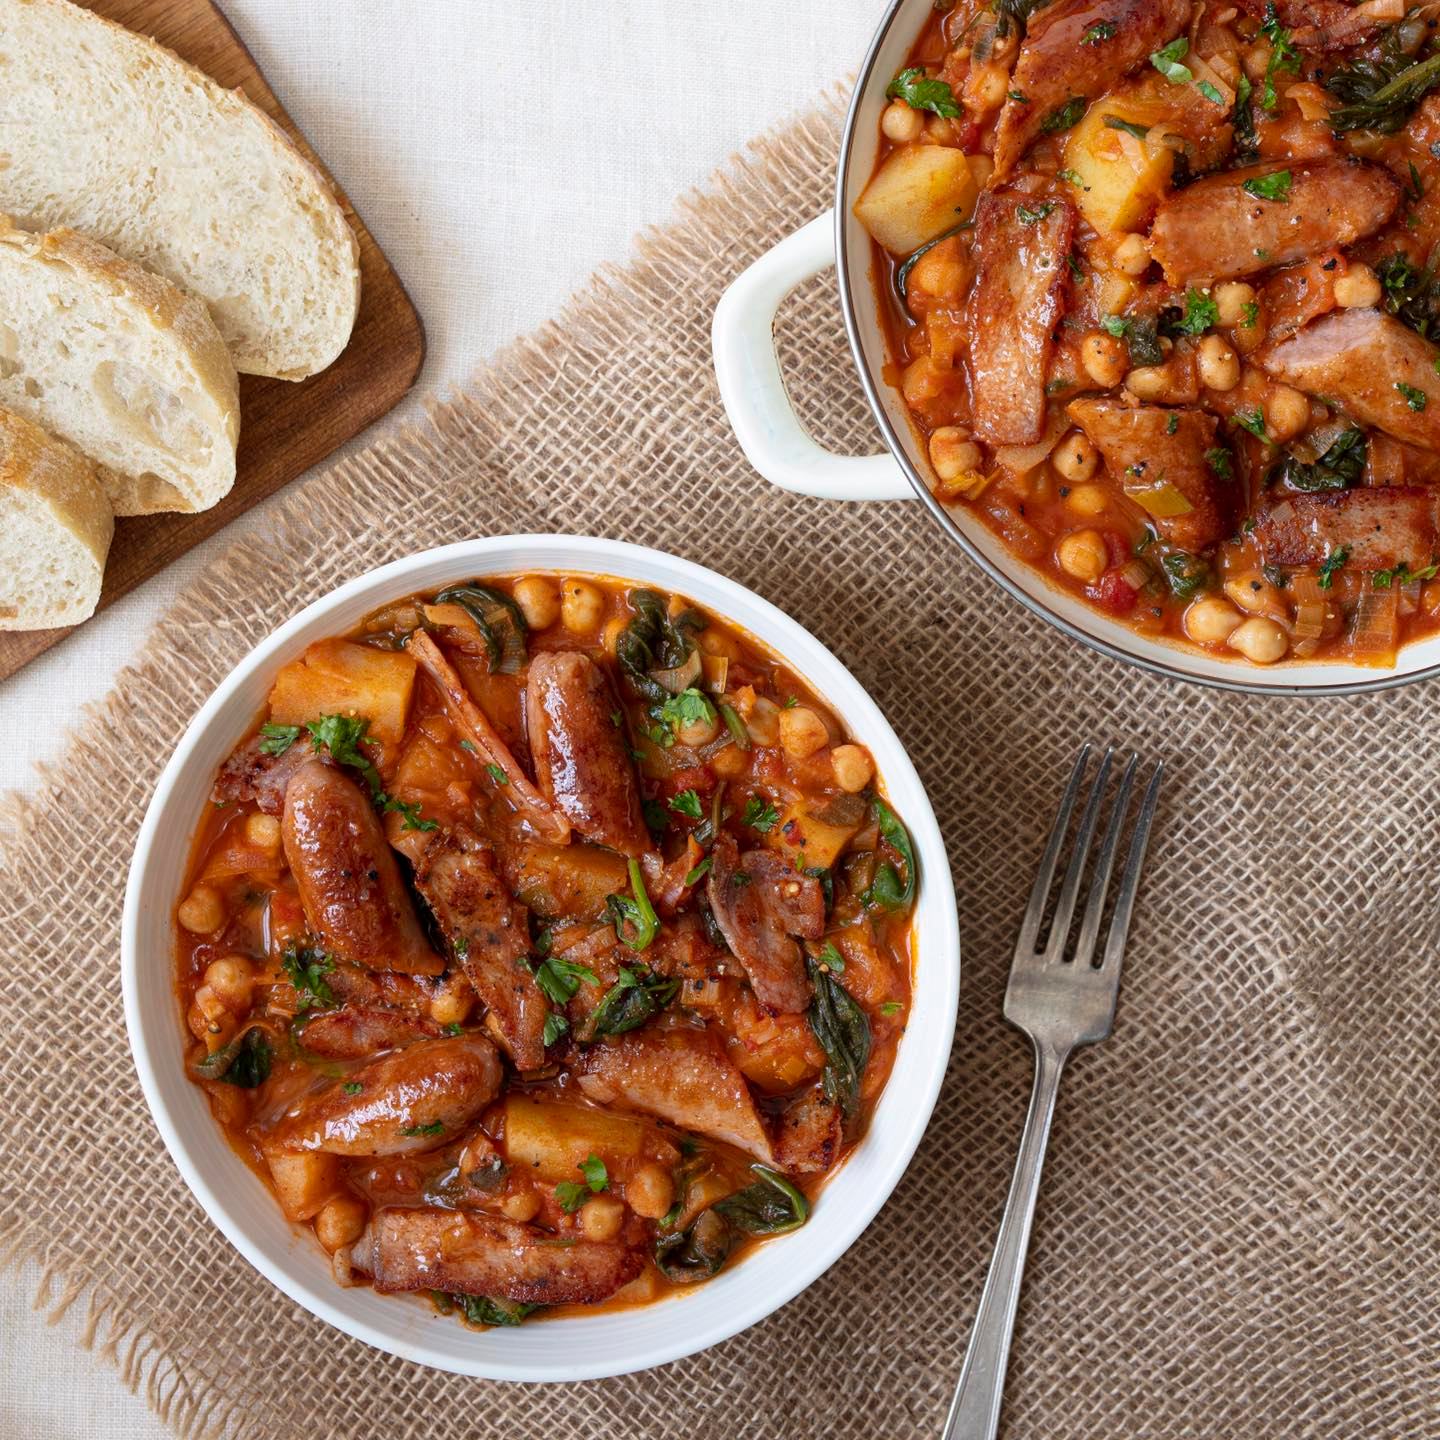 CLONAKILTY SAUSAGE AND CHICKPEA CASSEROLE